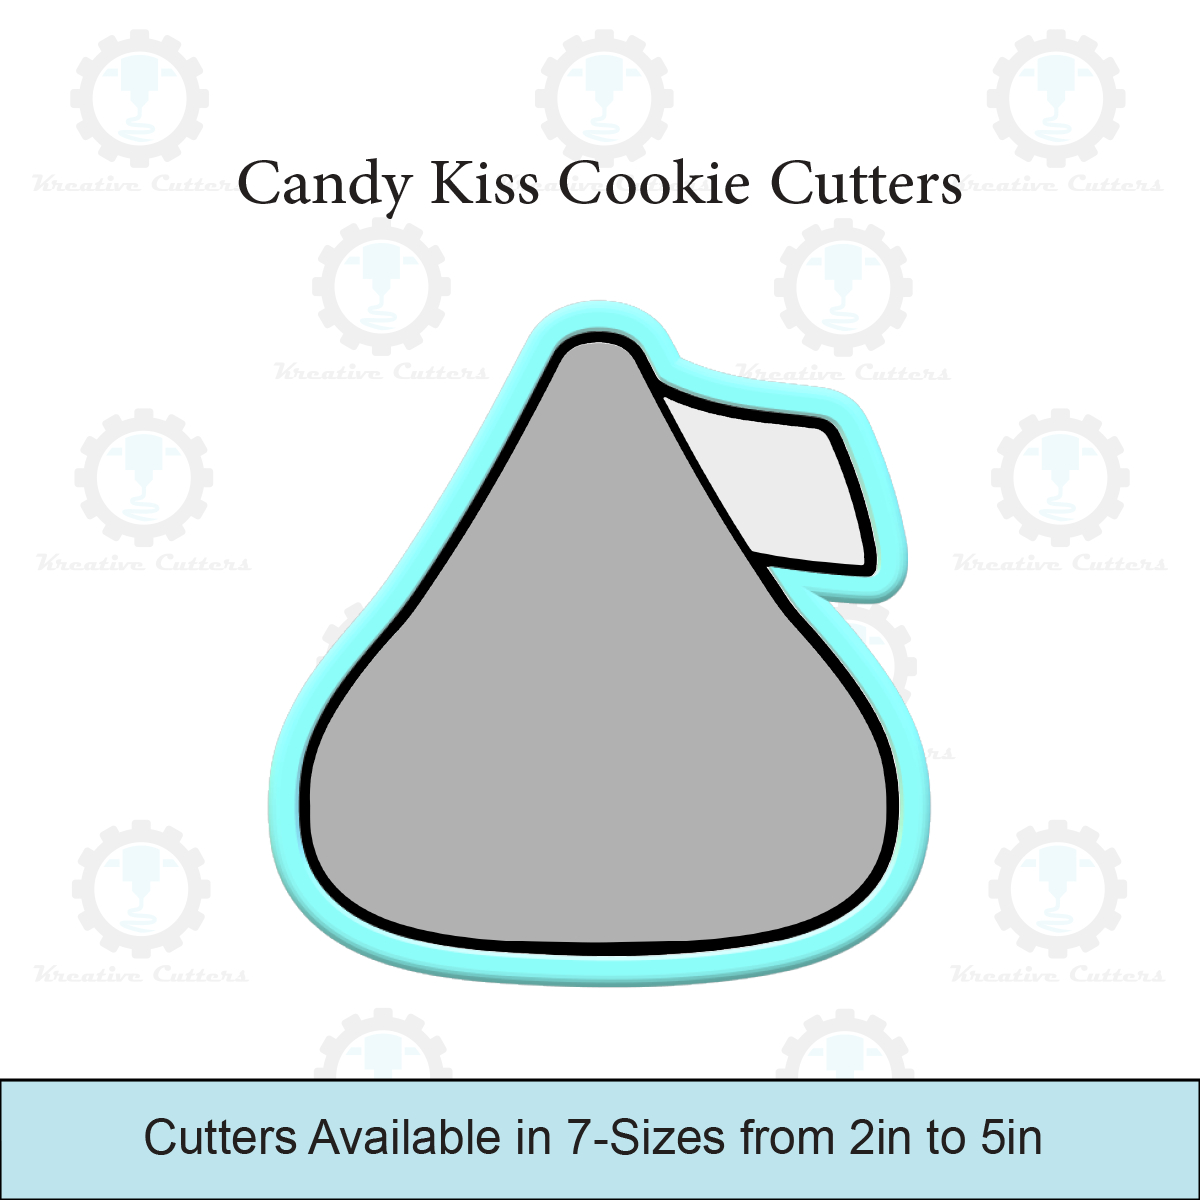 Candy Kiss Cookie Cutters